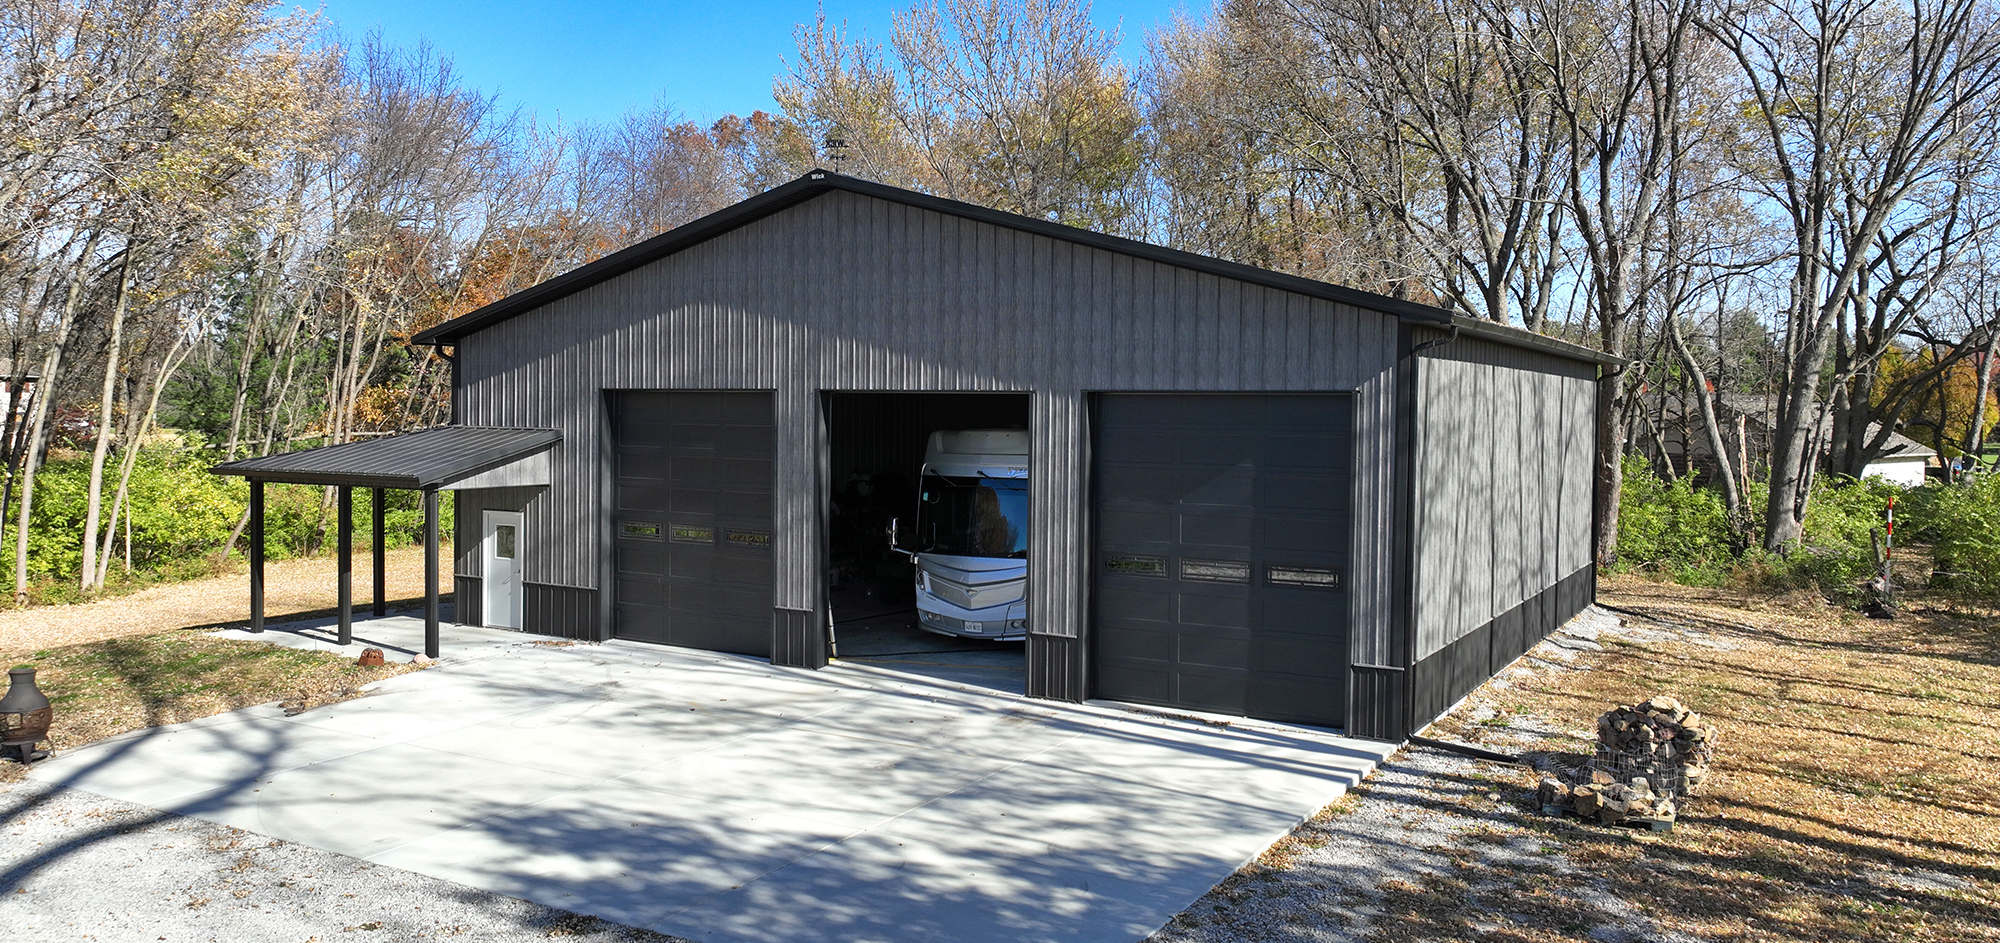 Suburban storage shed and workshop